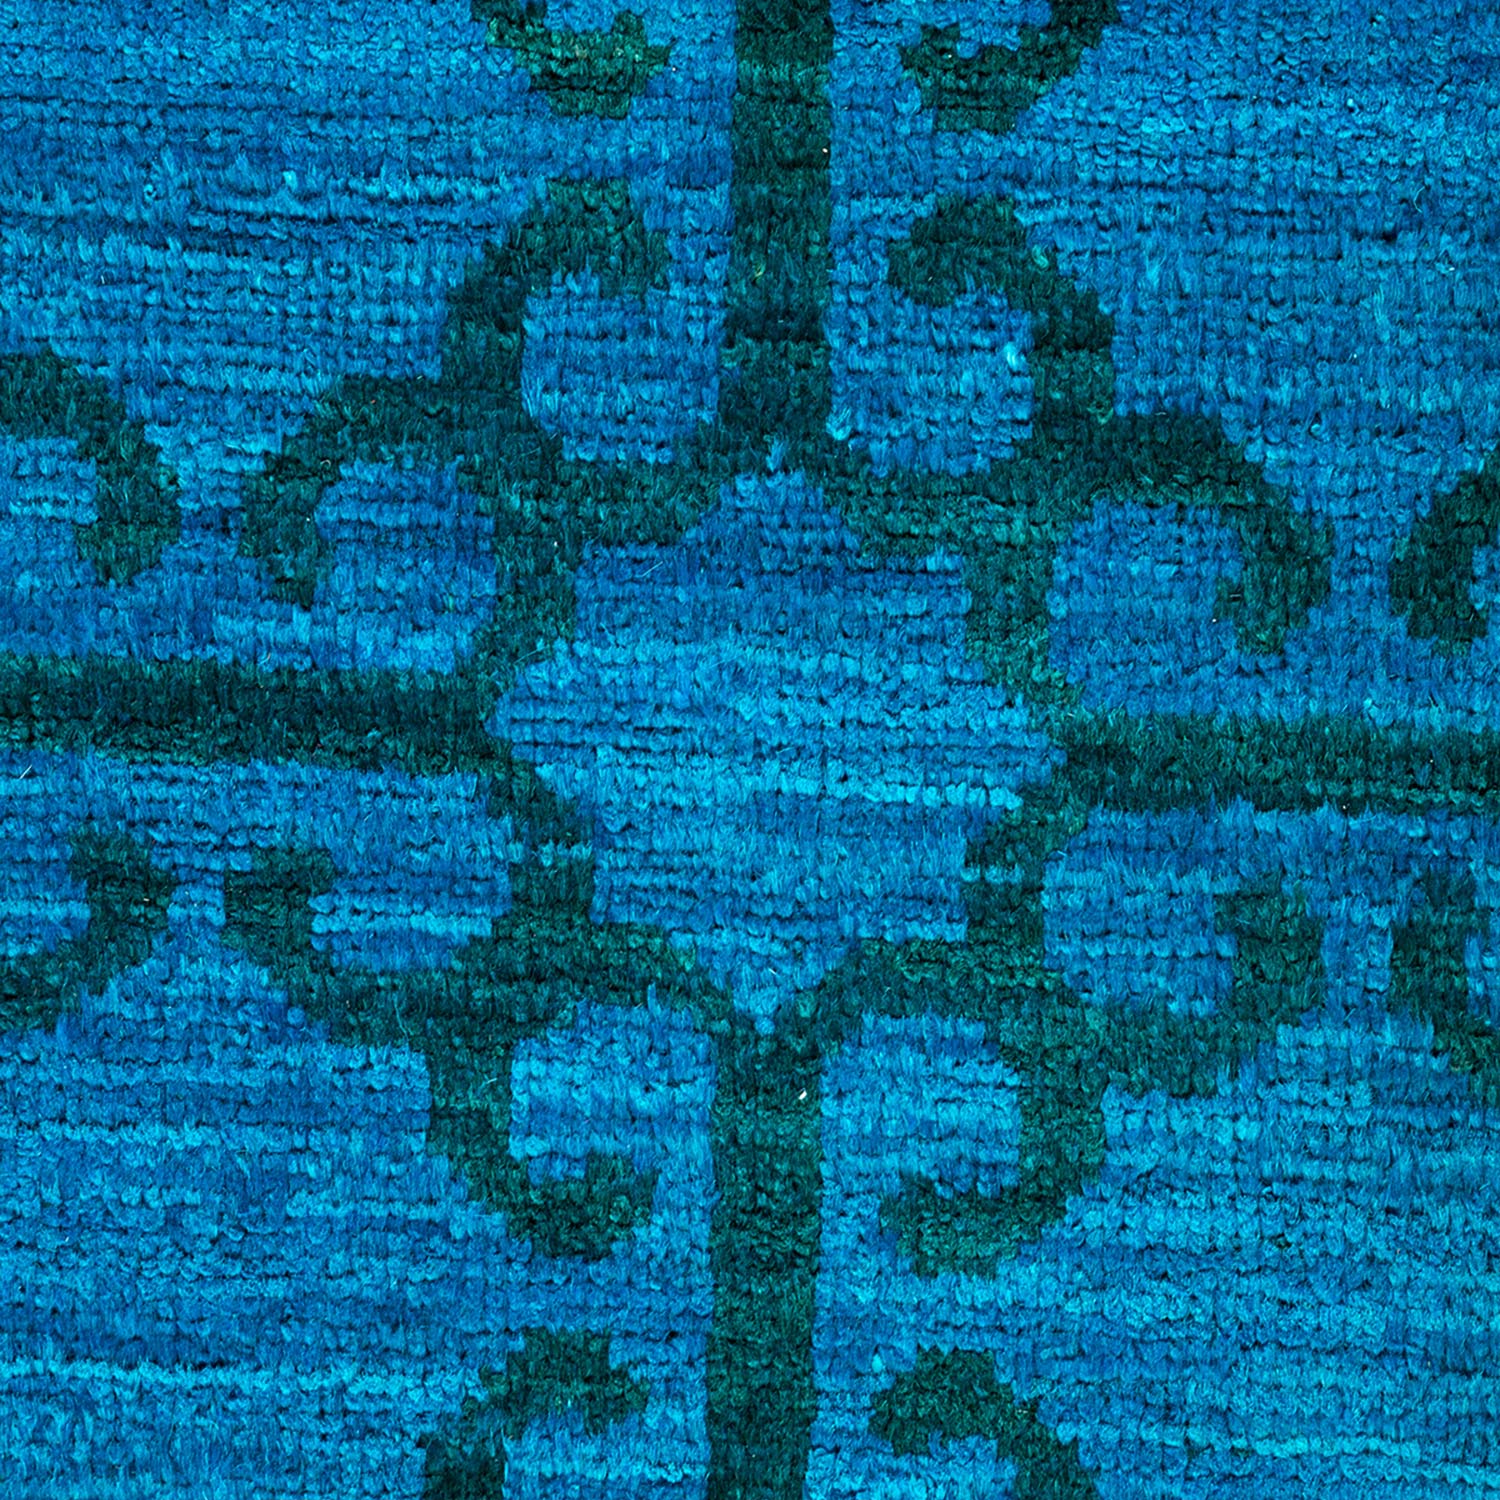 Abstract, textured pattern in shades of blue with geometric shapes